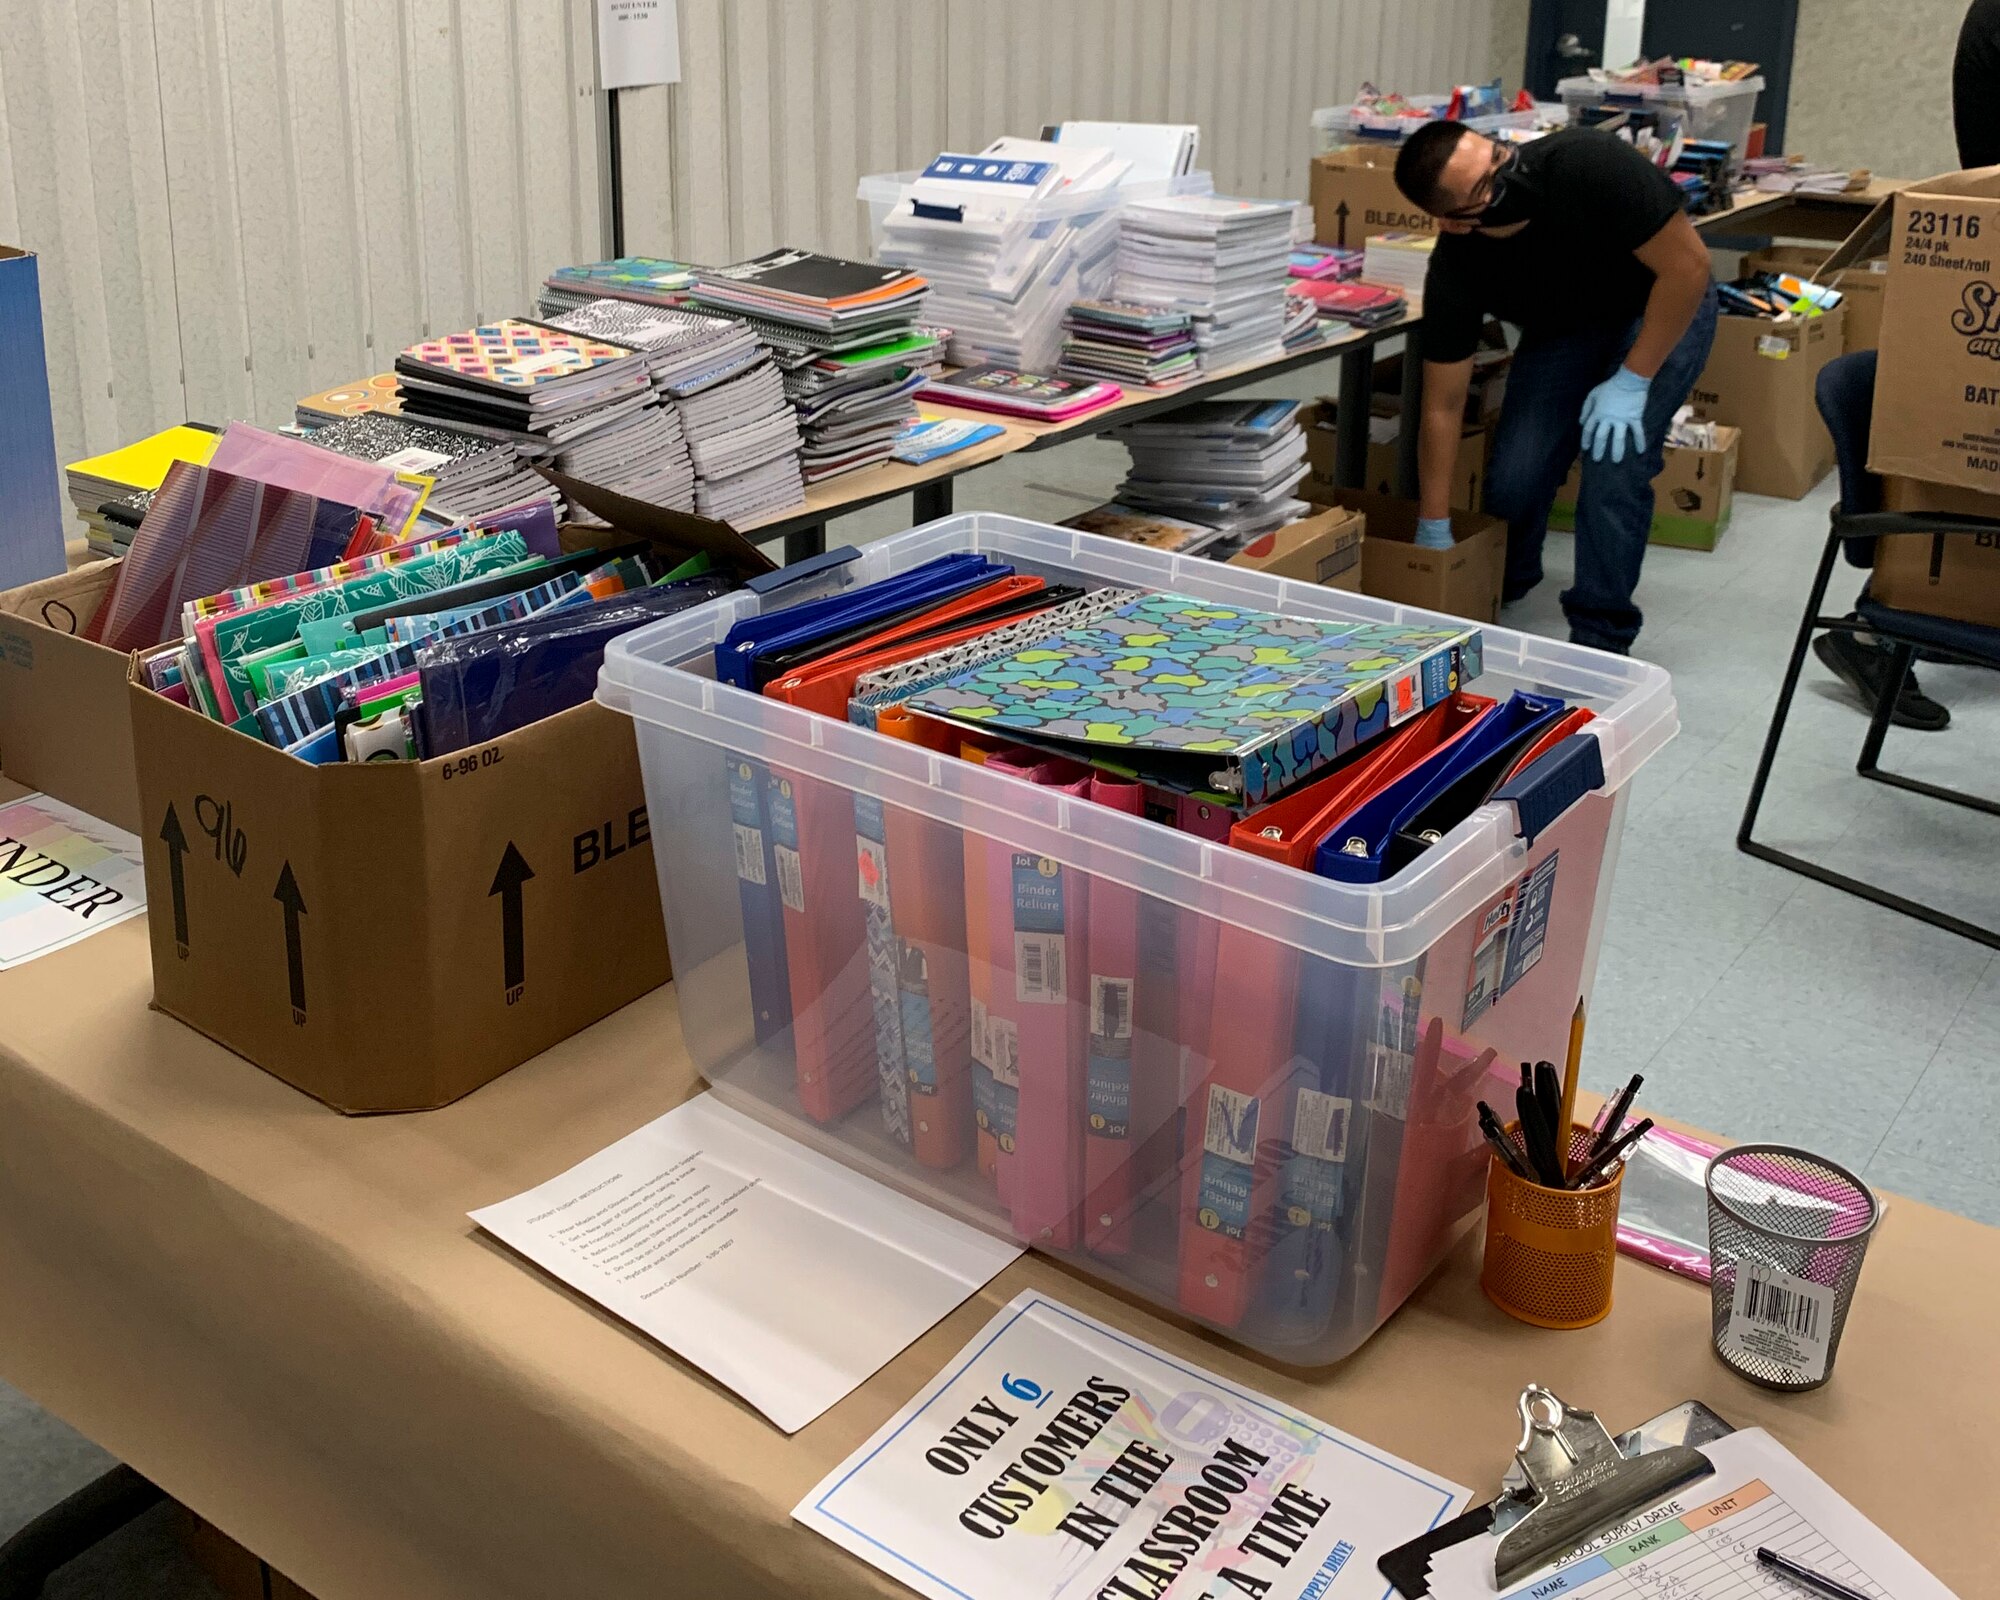 The 144th Fighter Wing’s Airman and Family Readiness hosted its annual School Supply Giveaway for military families. Student flight members and volunteers from the Airmen and Family Readiness Office helped to set up the supplies.